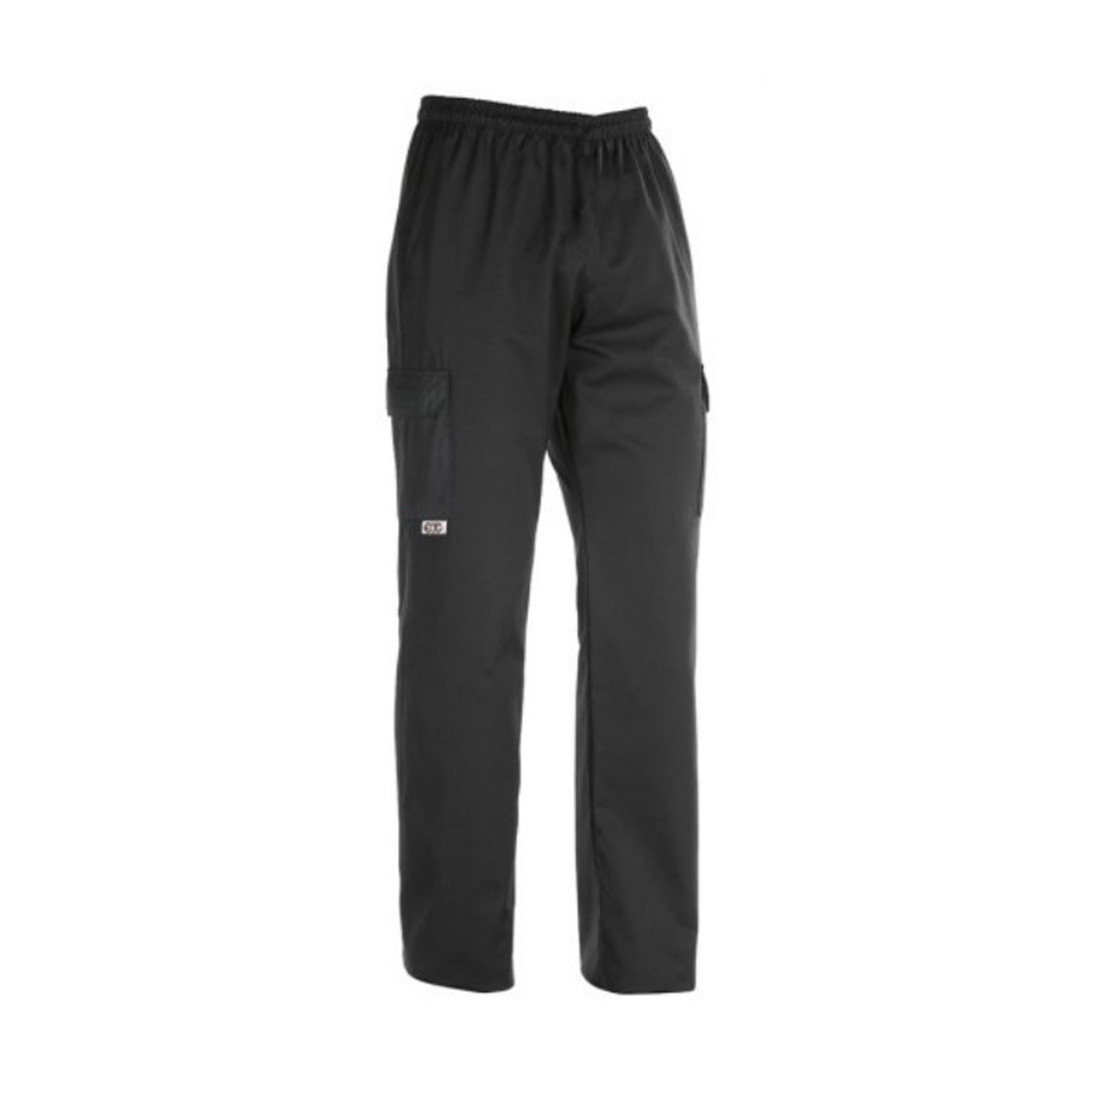 Coulisse Leg Pocket Trousers, 65% poliester/35% bumbac - Safetywear